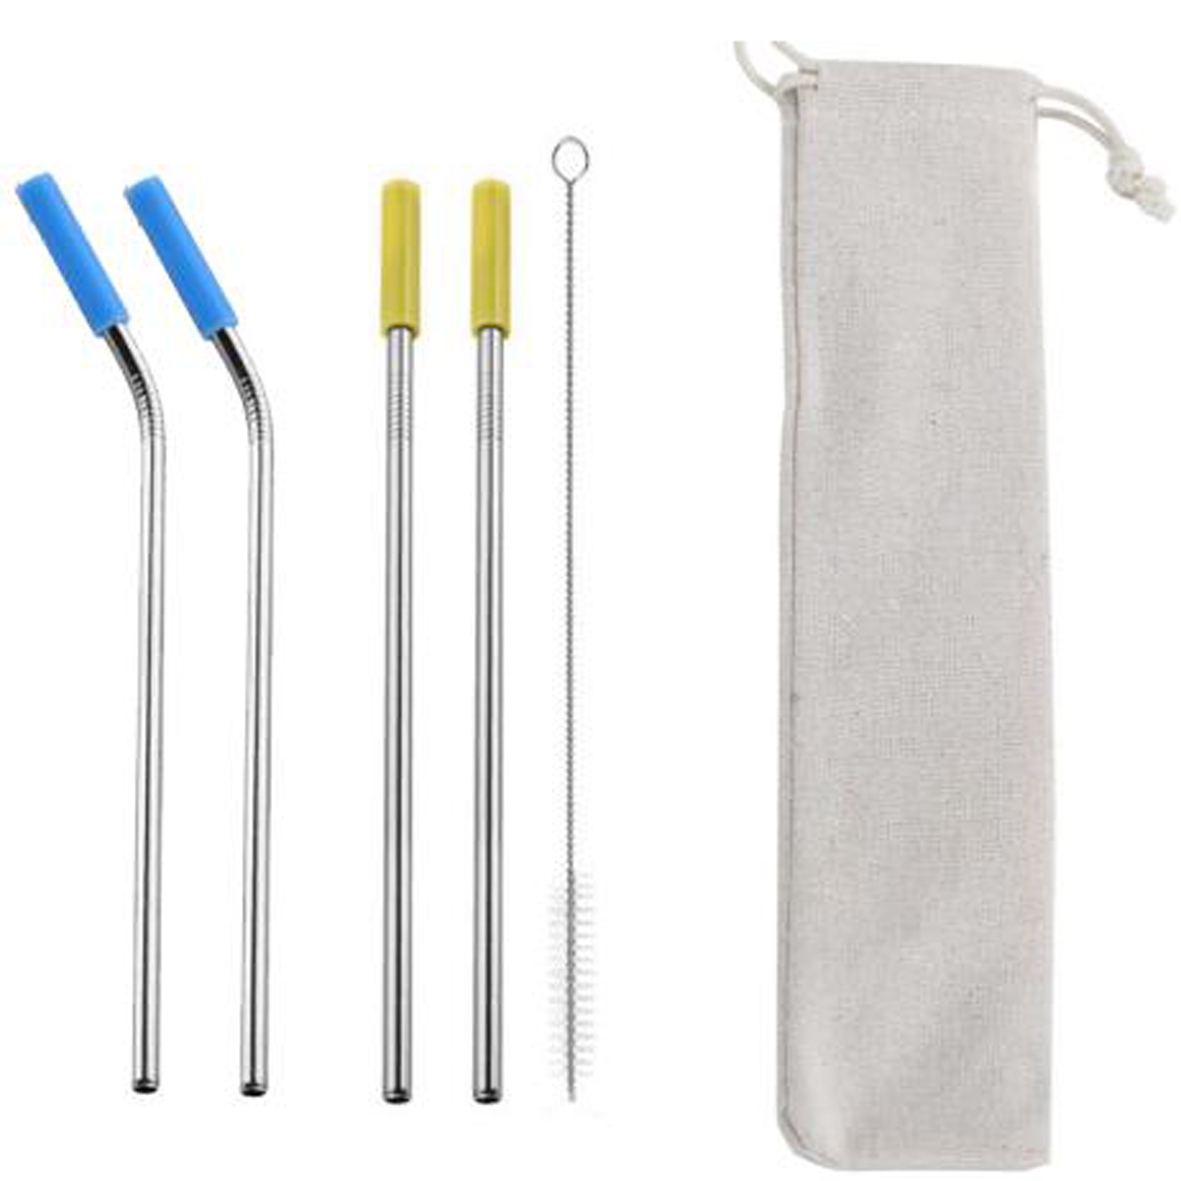 GL-ELY1256 5 in 1 Metal Straw Set with Silicone Tip